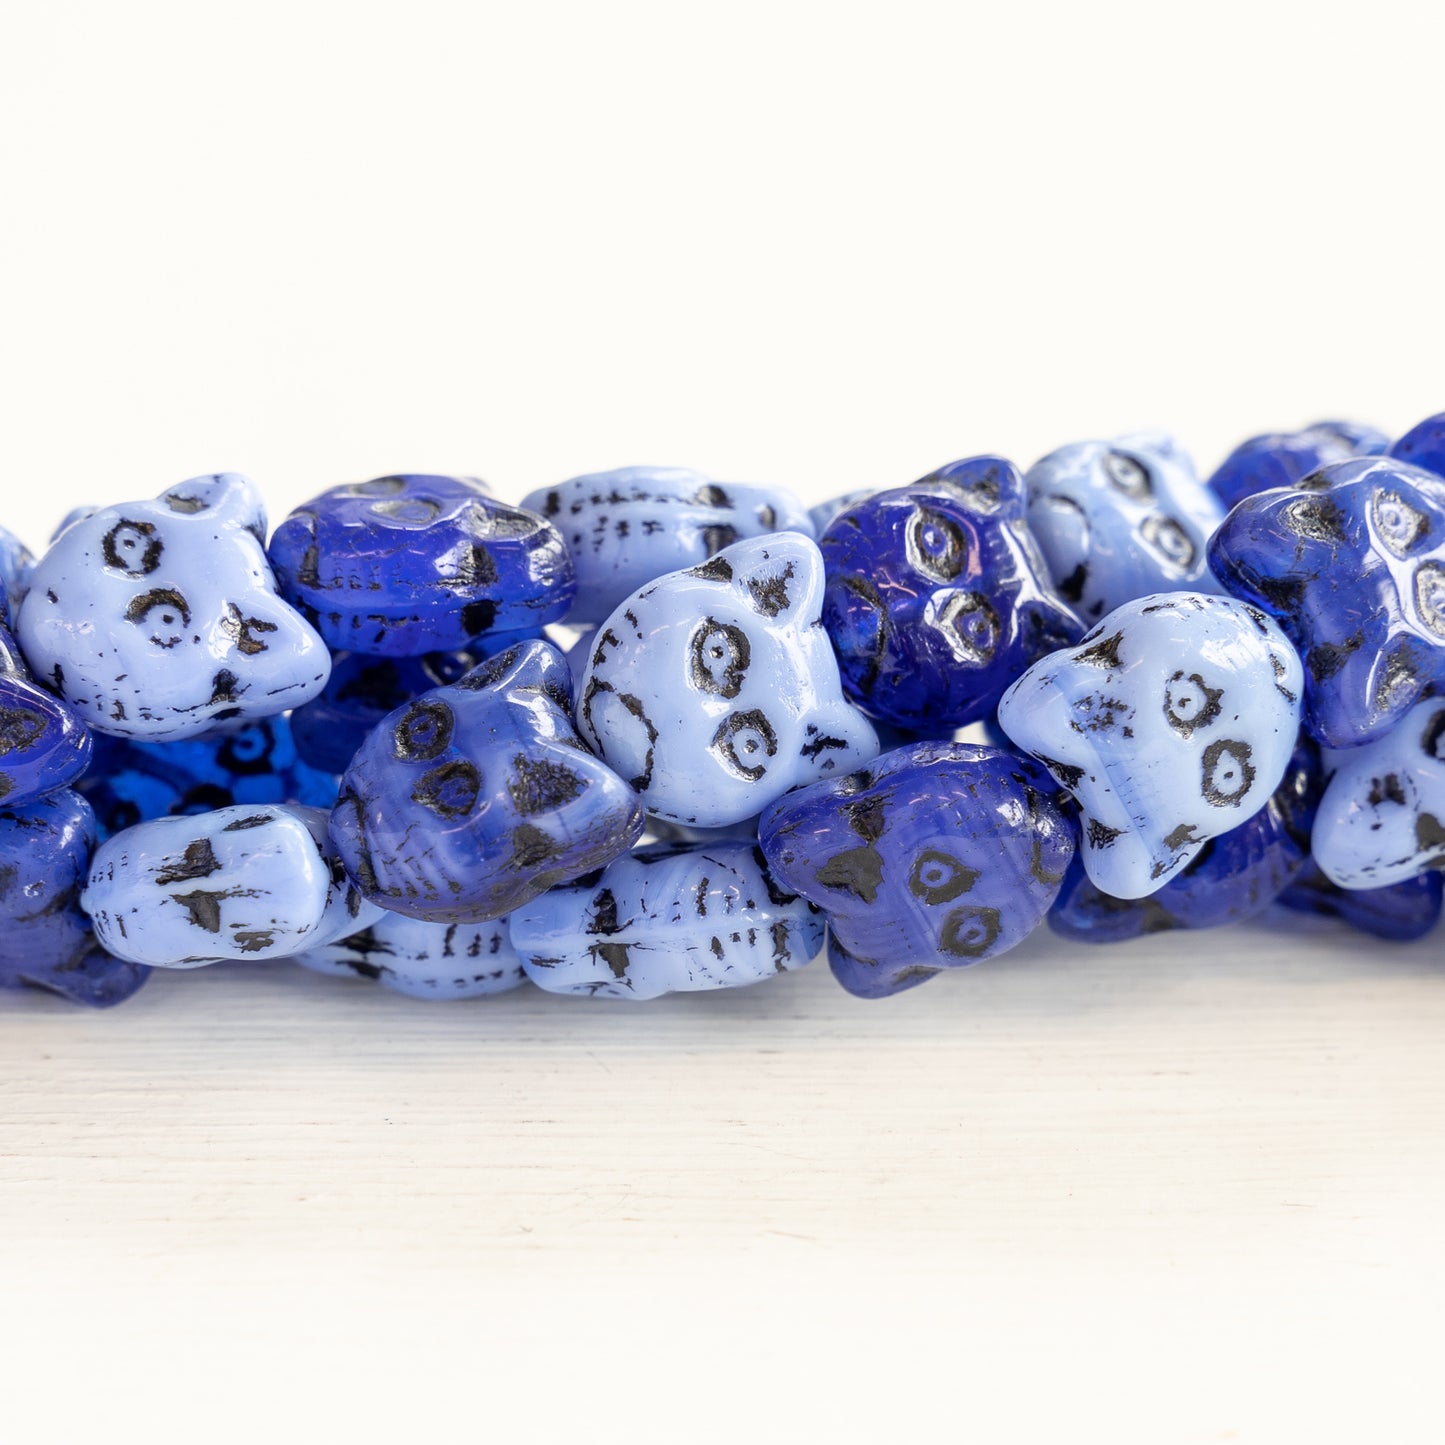 Load image into Gallery viewer, 12mm Glass Cat Beads - Blue Mix with Black Wash - 10 Beads
